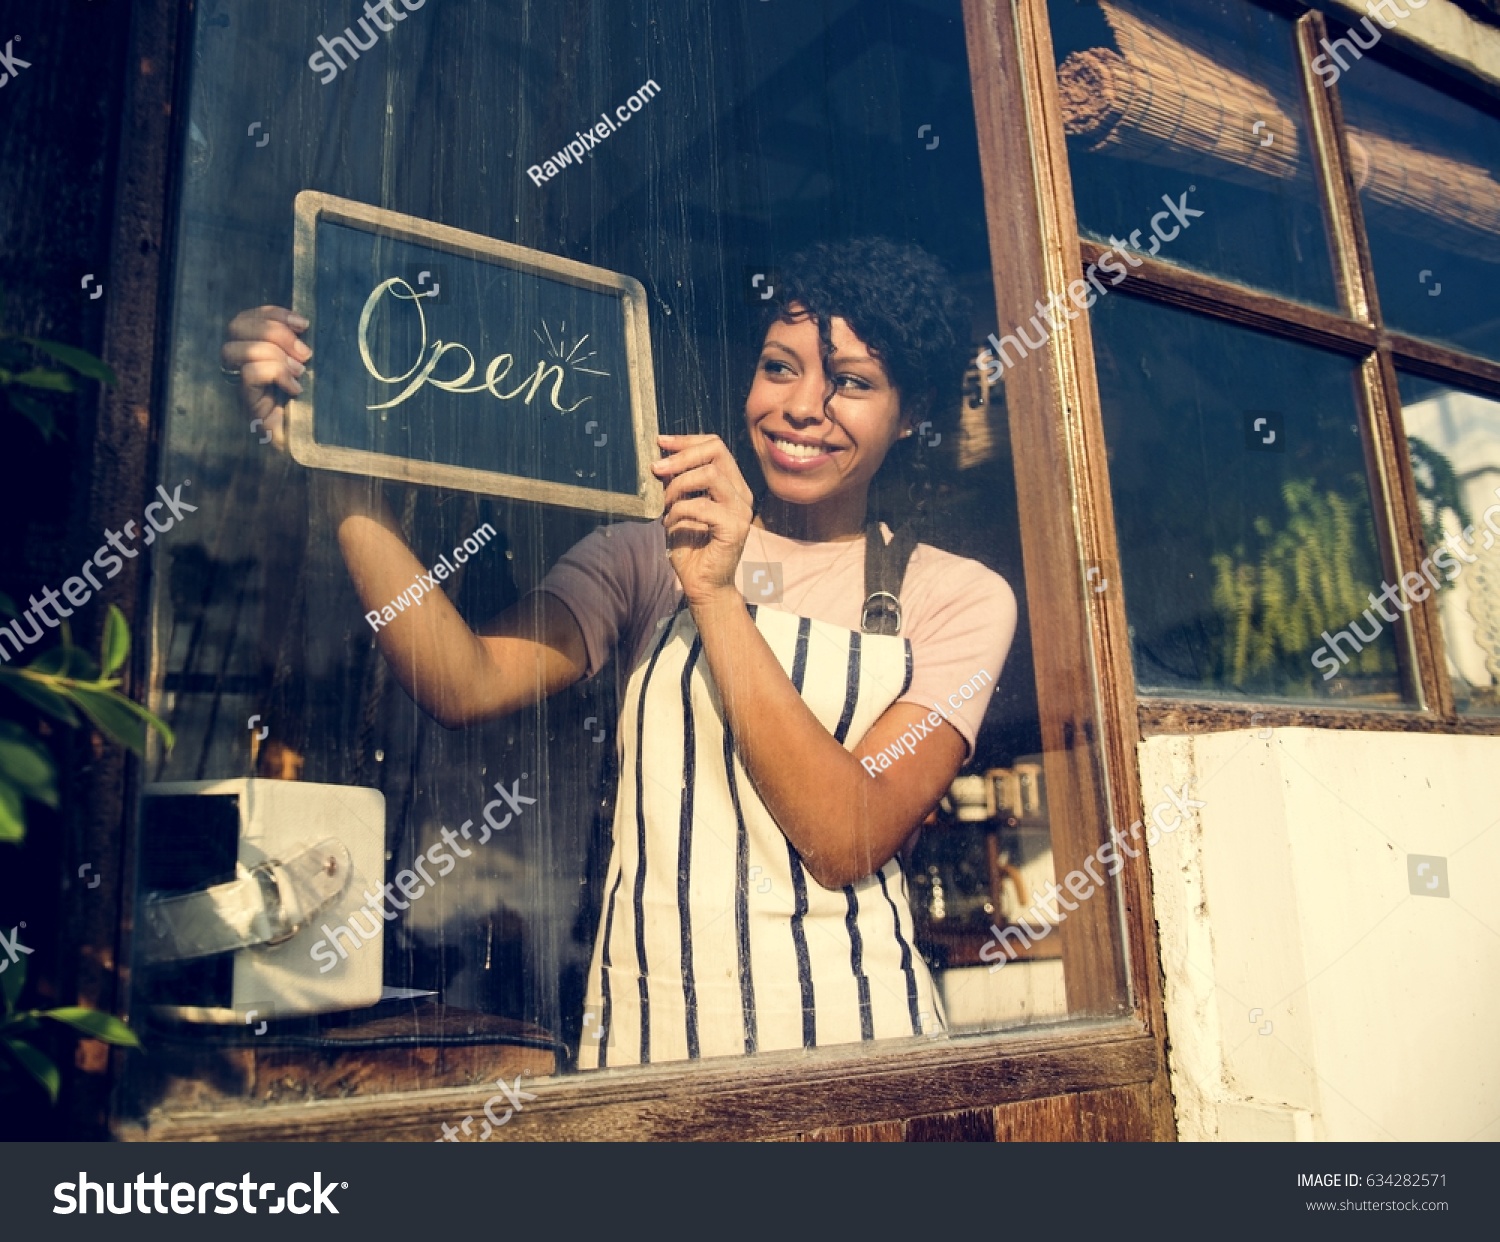 Woman Hanging Open Sign by the Glass Window #634282571